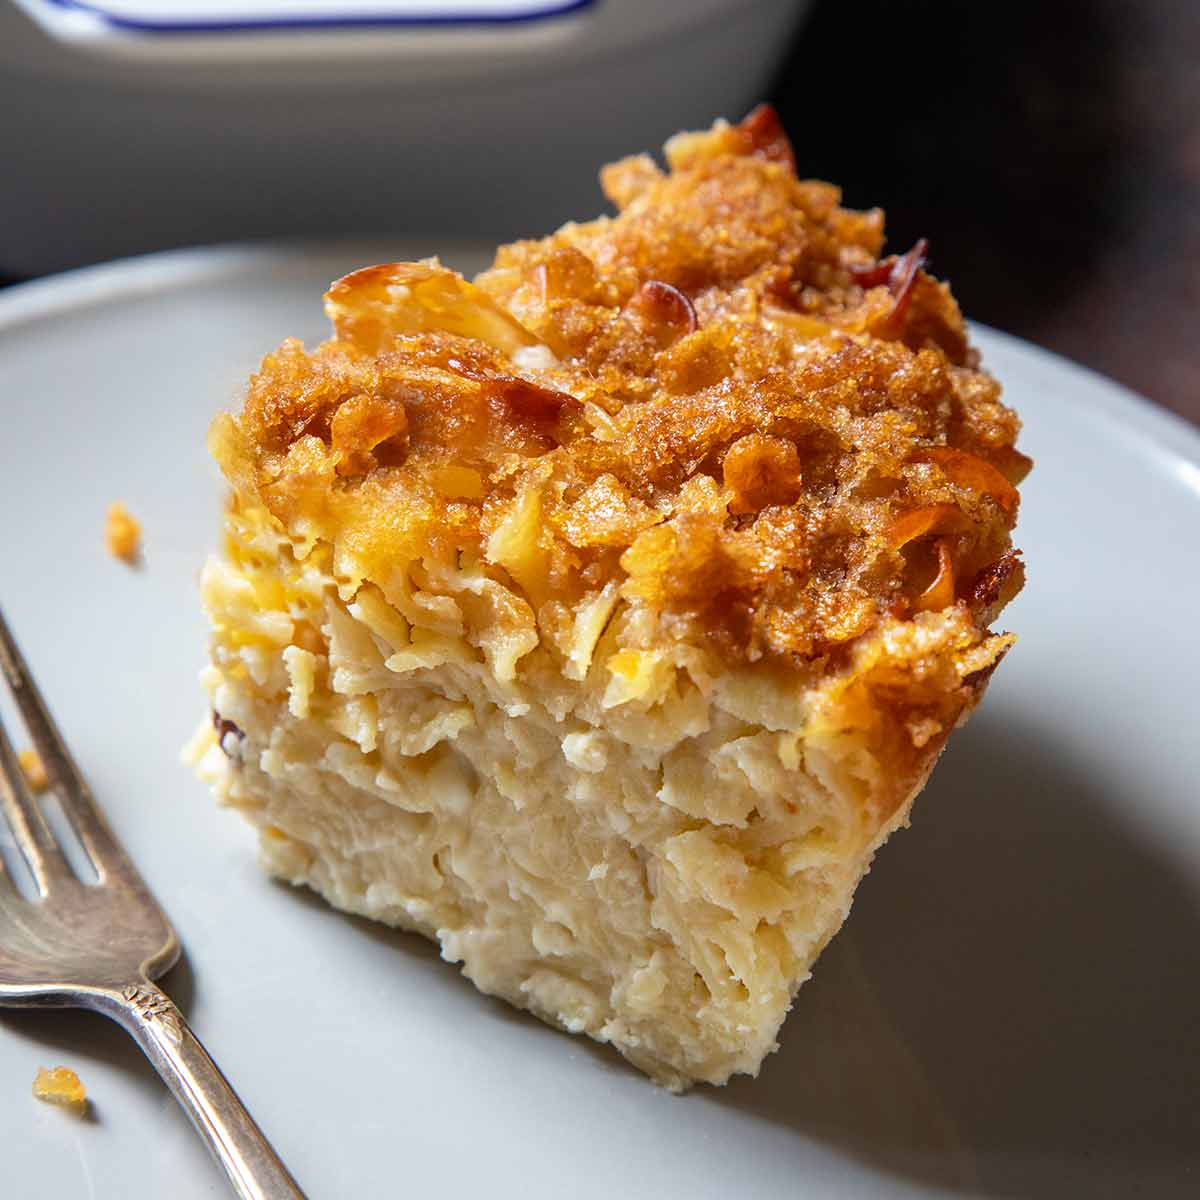 A casserole dish of sweet noodle kugel; in front is a plate with a slice of kugel on it.